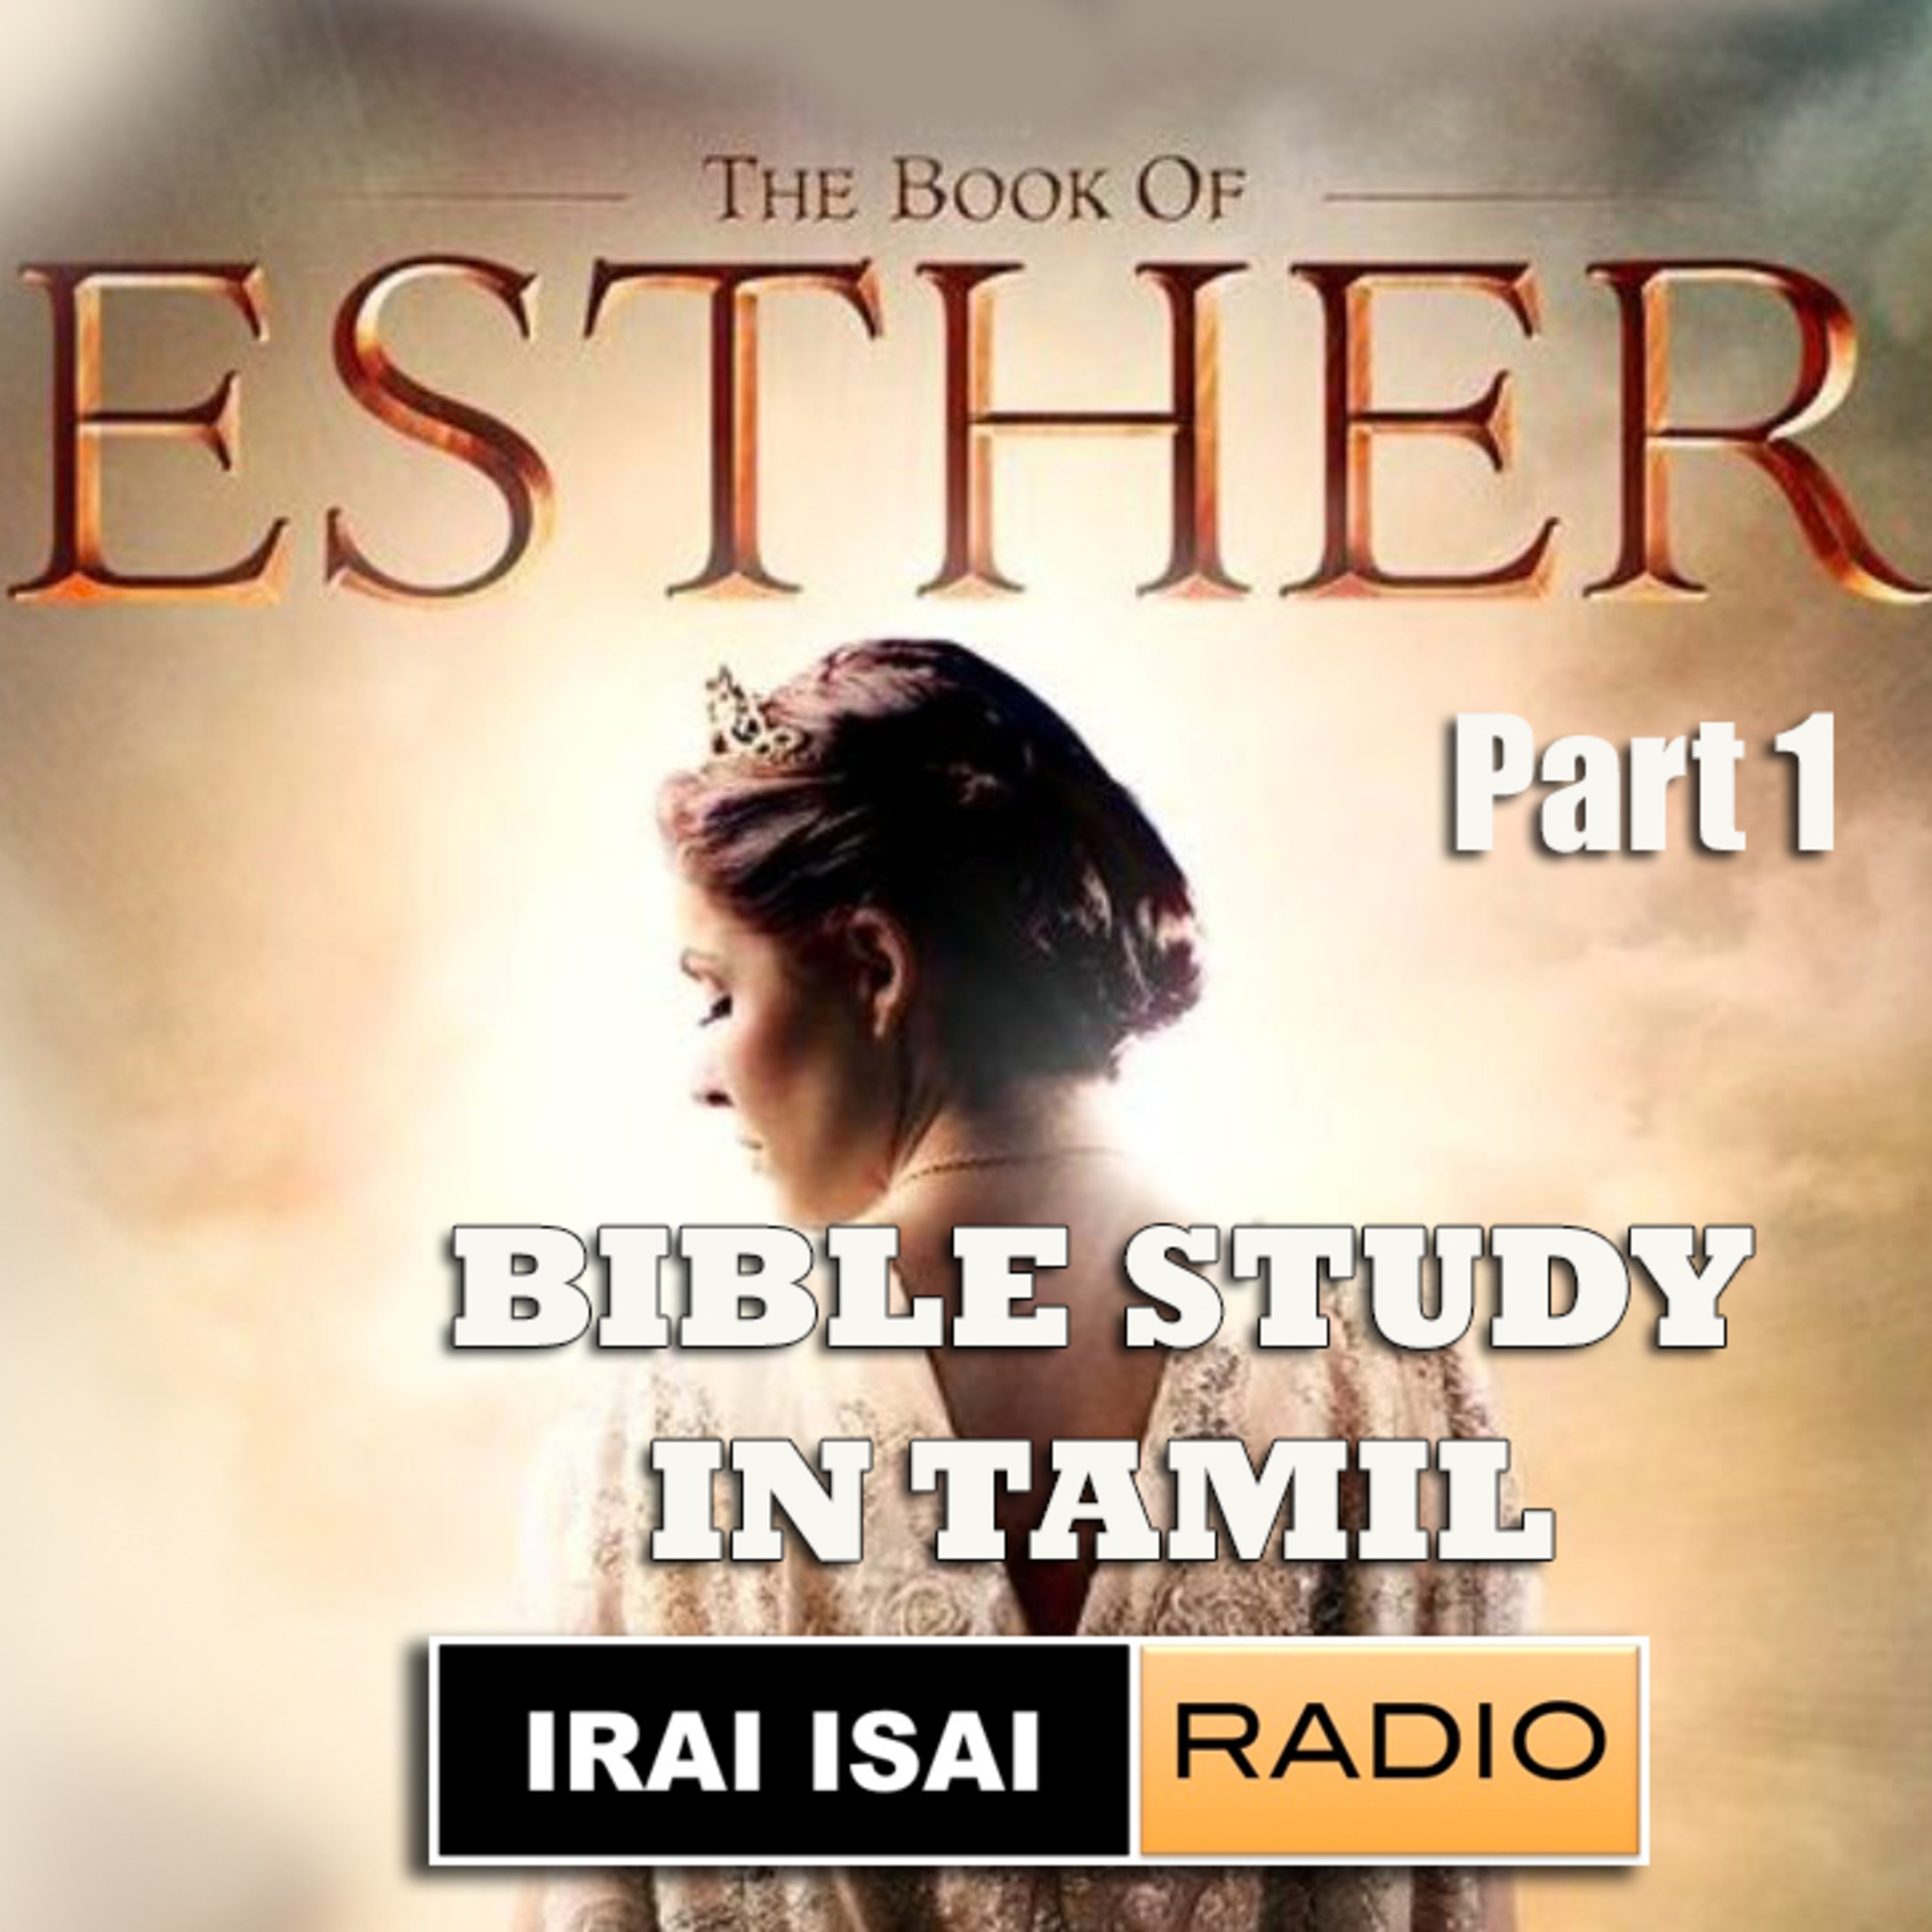 esther bible study hagee